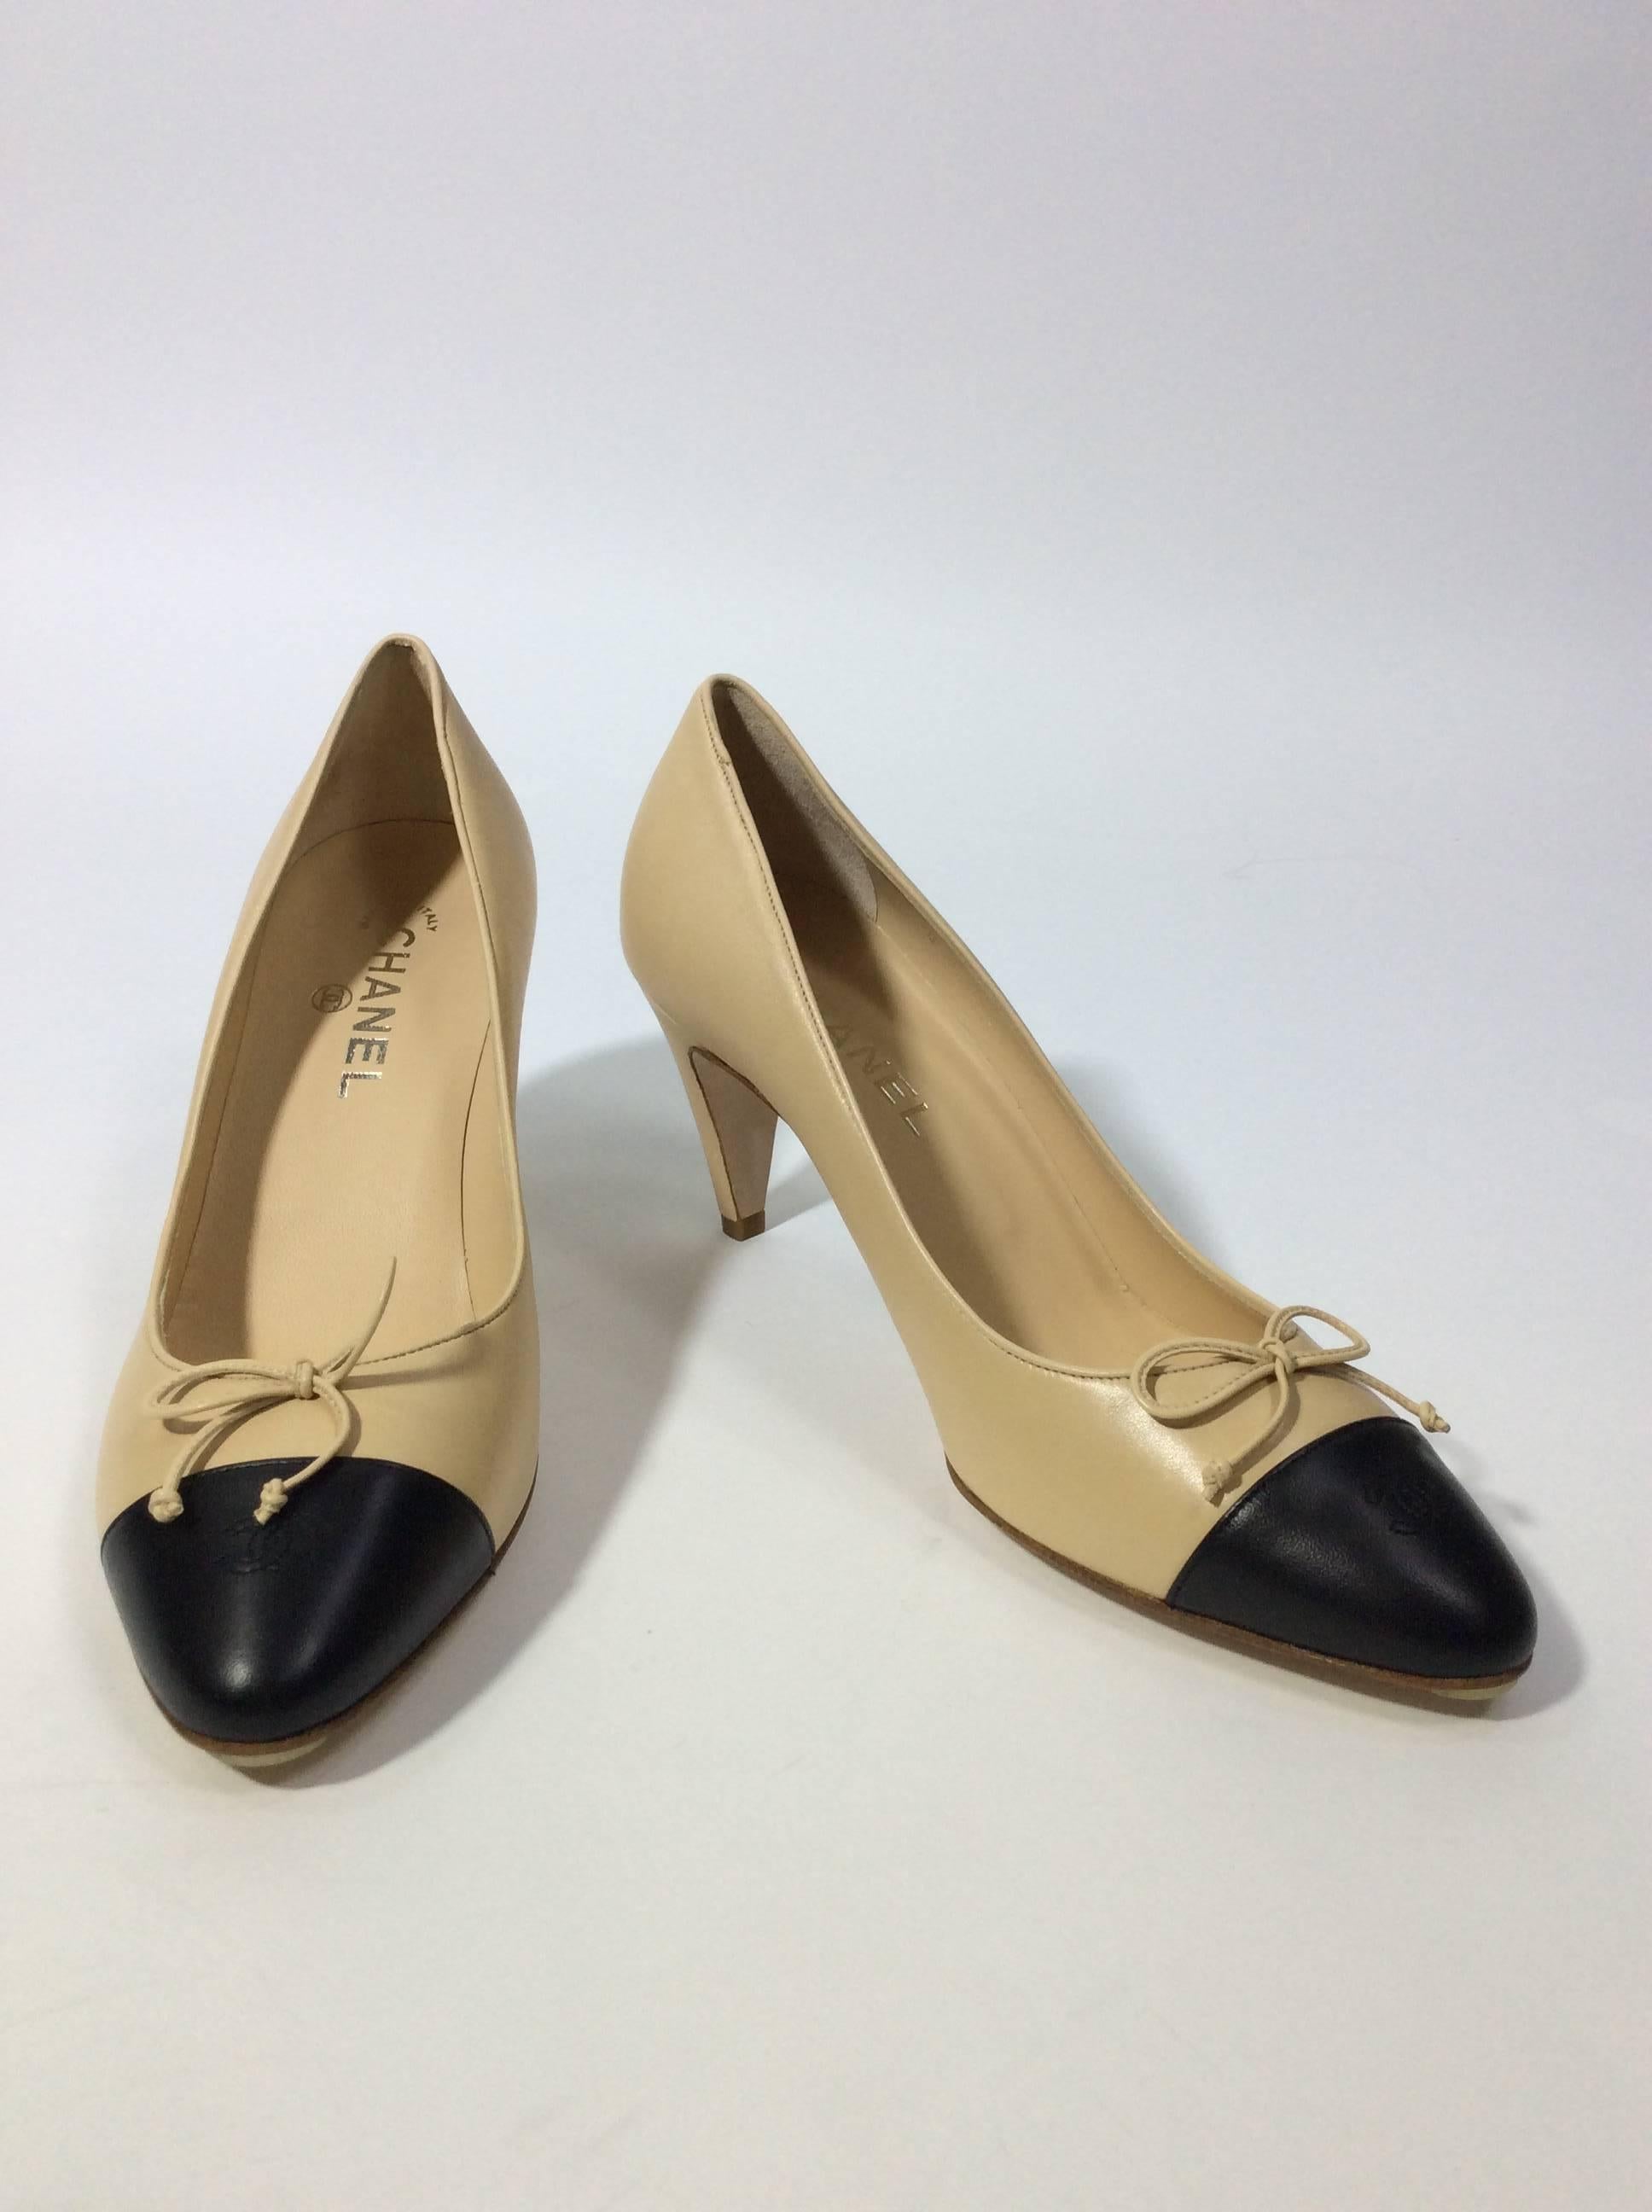 Nude Leather Pump with Black Pointed Toe
Small Bow on Toe
CC Stitching On Front
3" Inch Heel, 3.25" Inch Sole Width
UK size 41 (Equates to US Size 10)